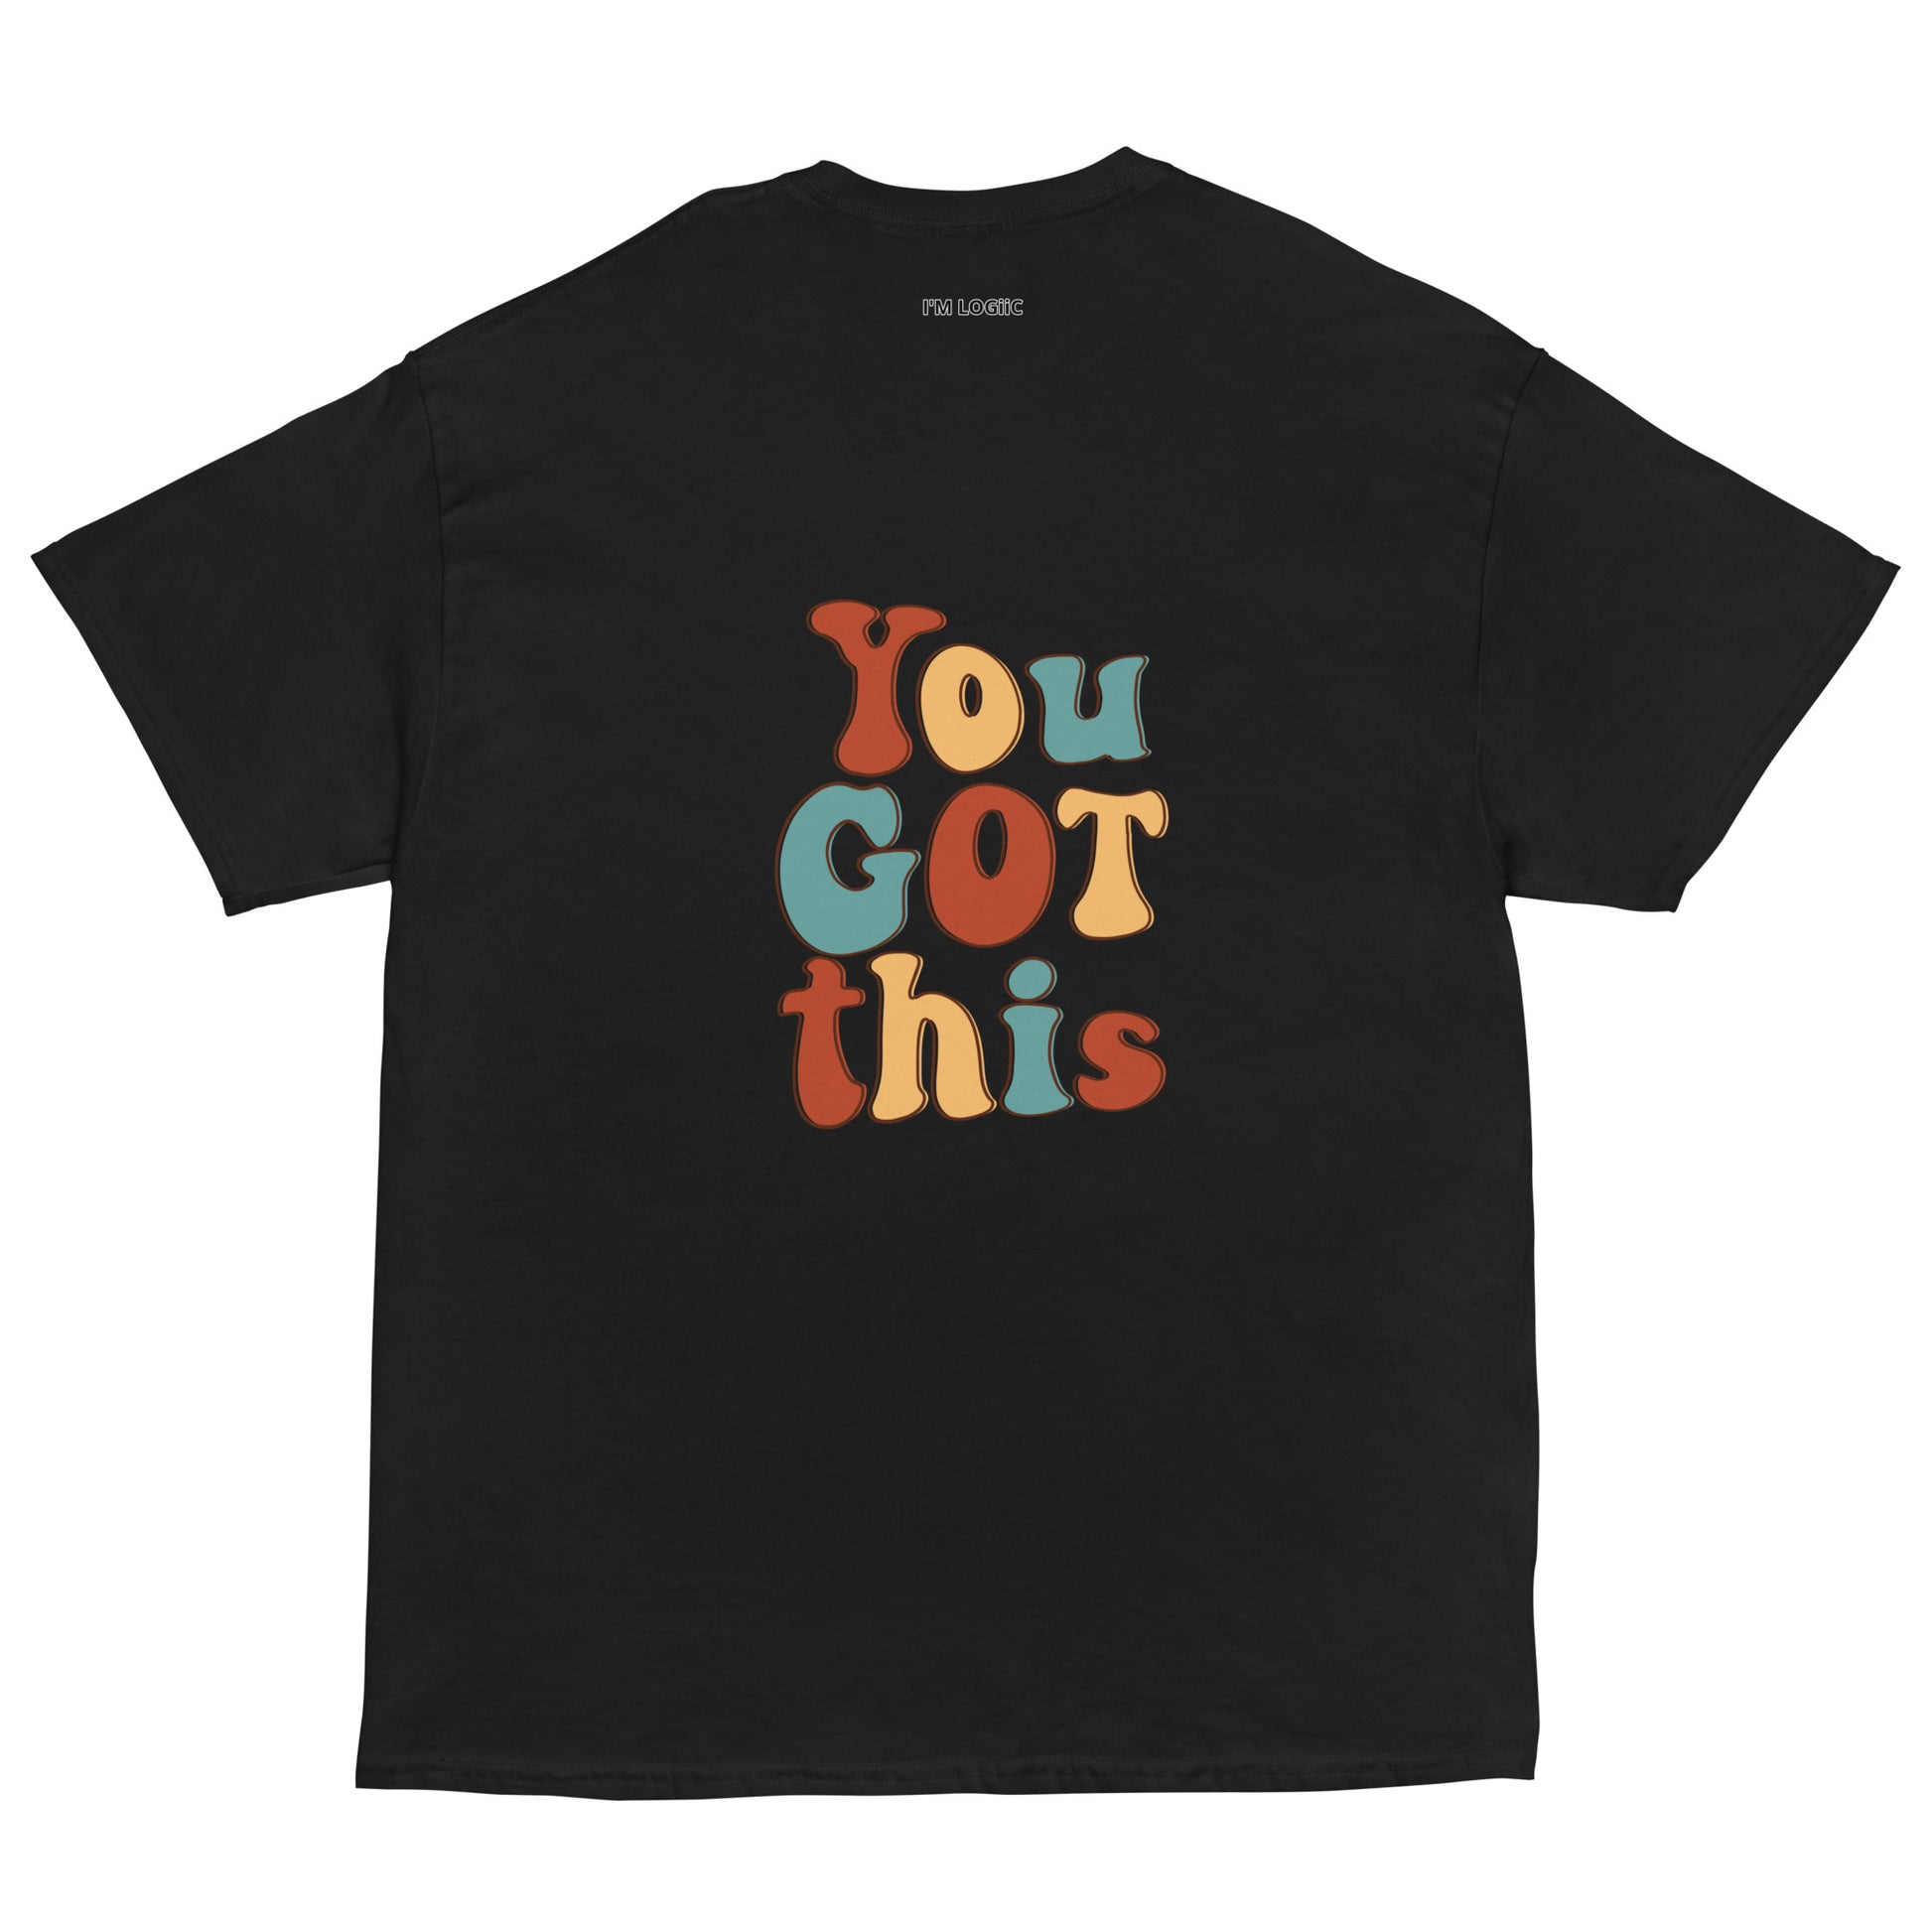 You Got This classic tee